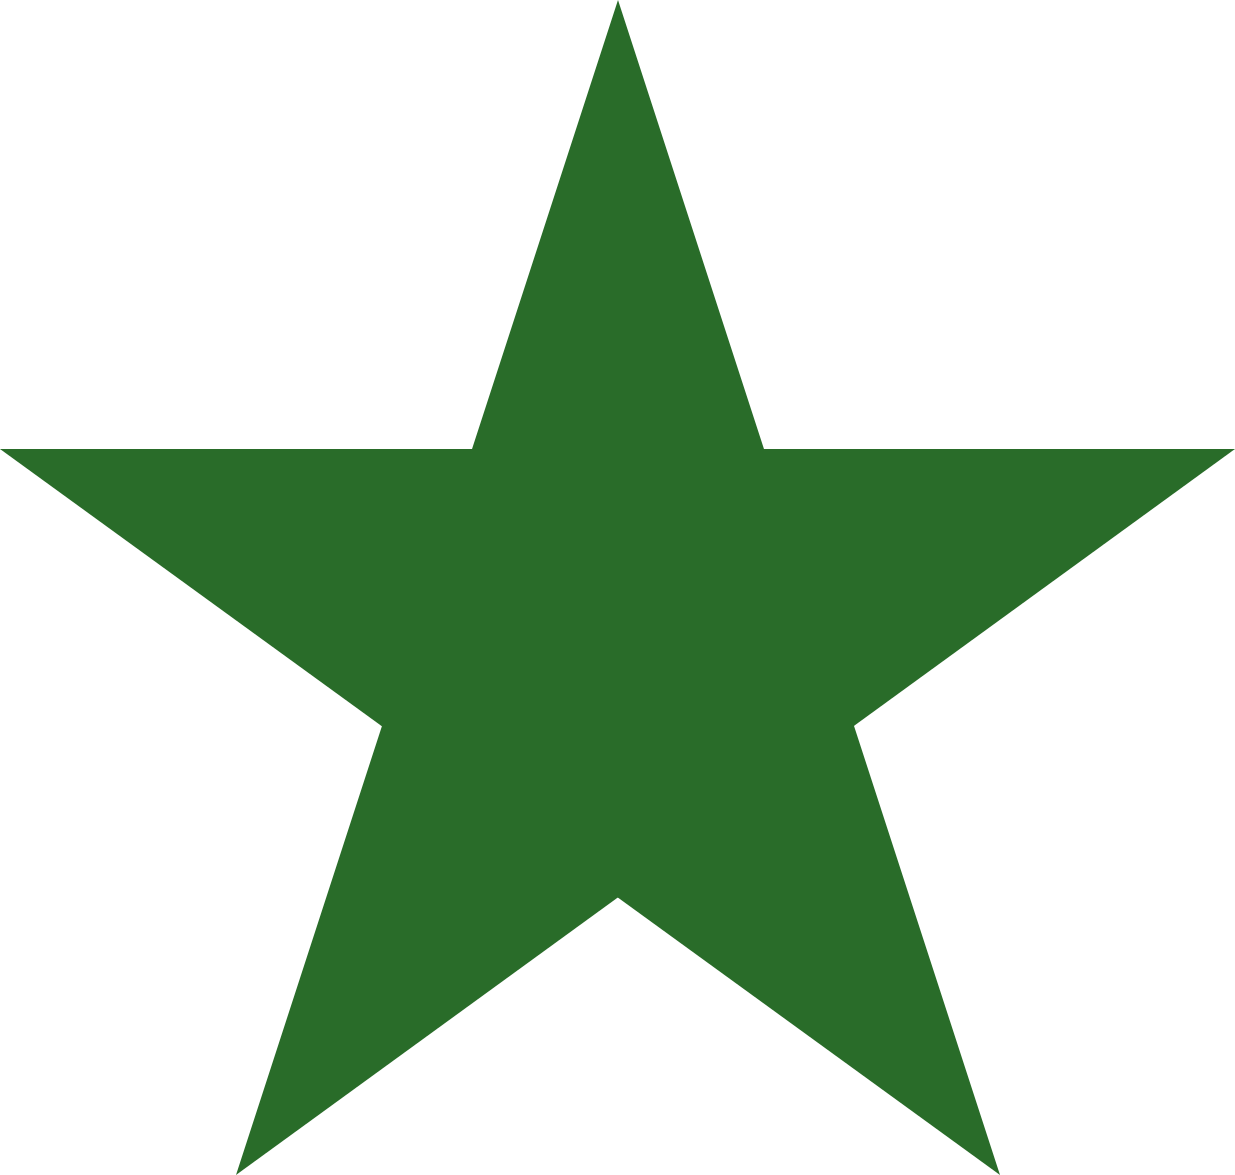 A Green Star On A Black Background